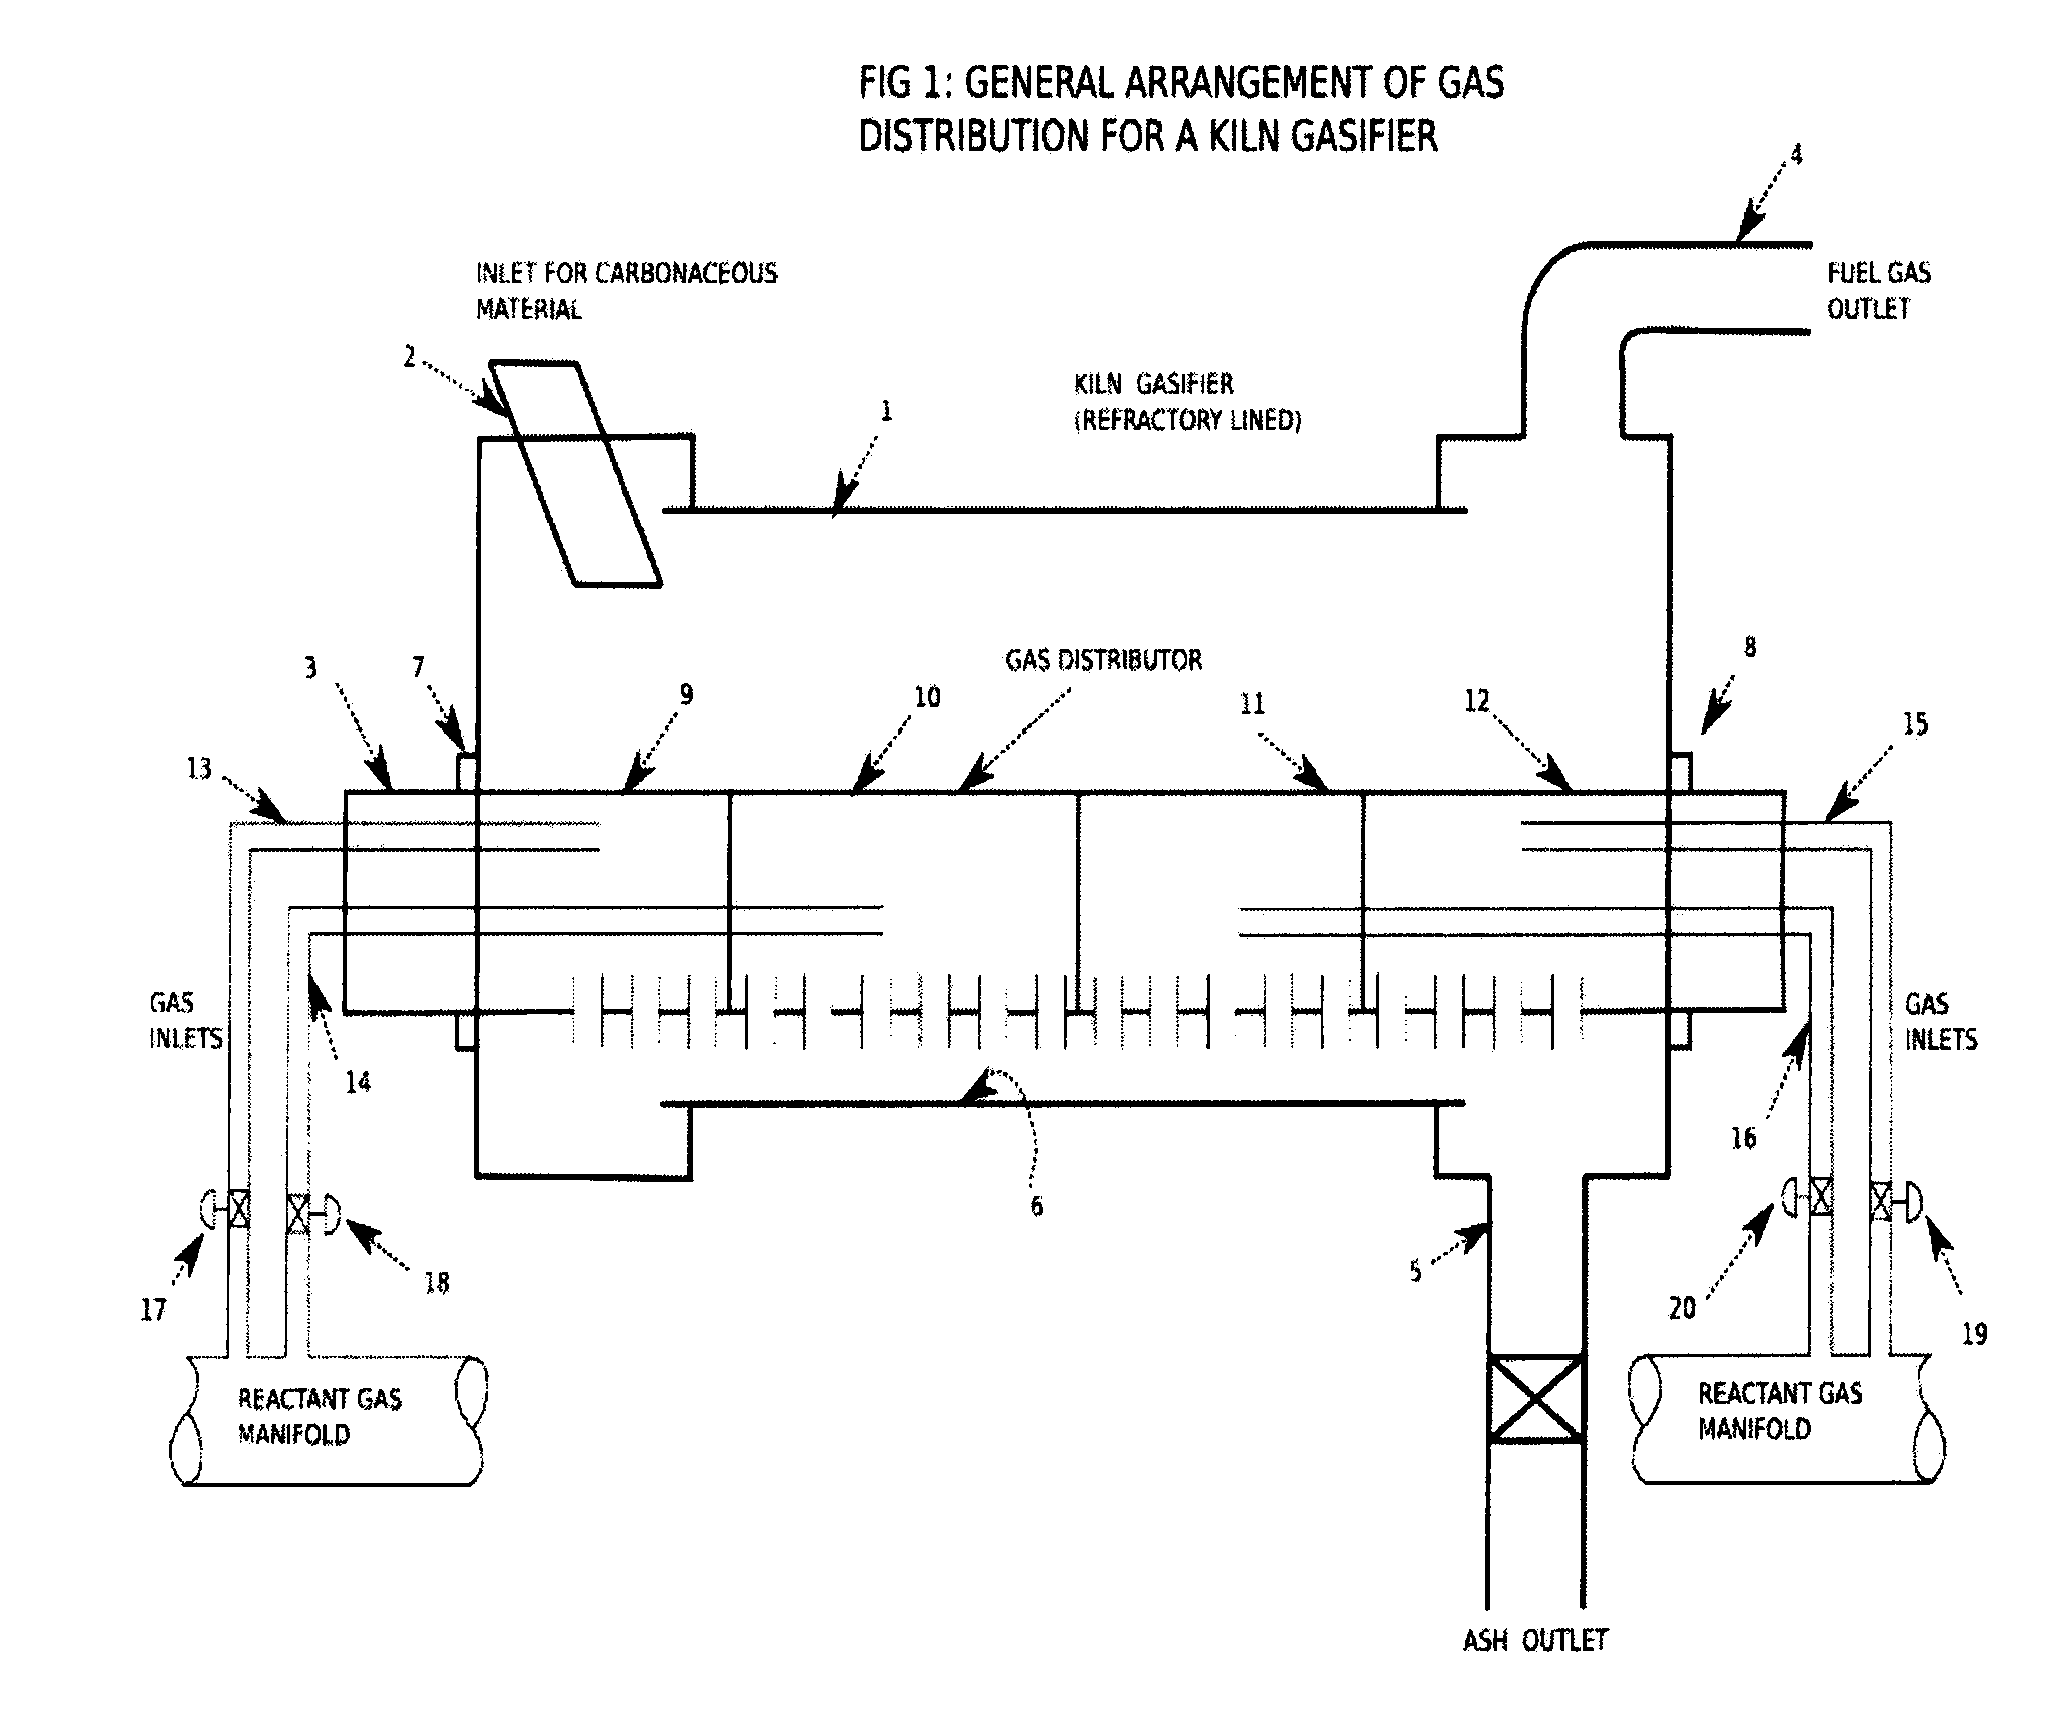 Gas distribution arrangement for a rotary reactor